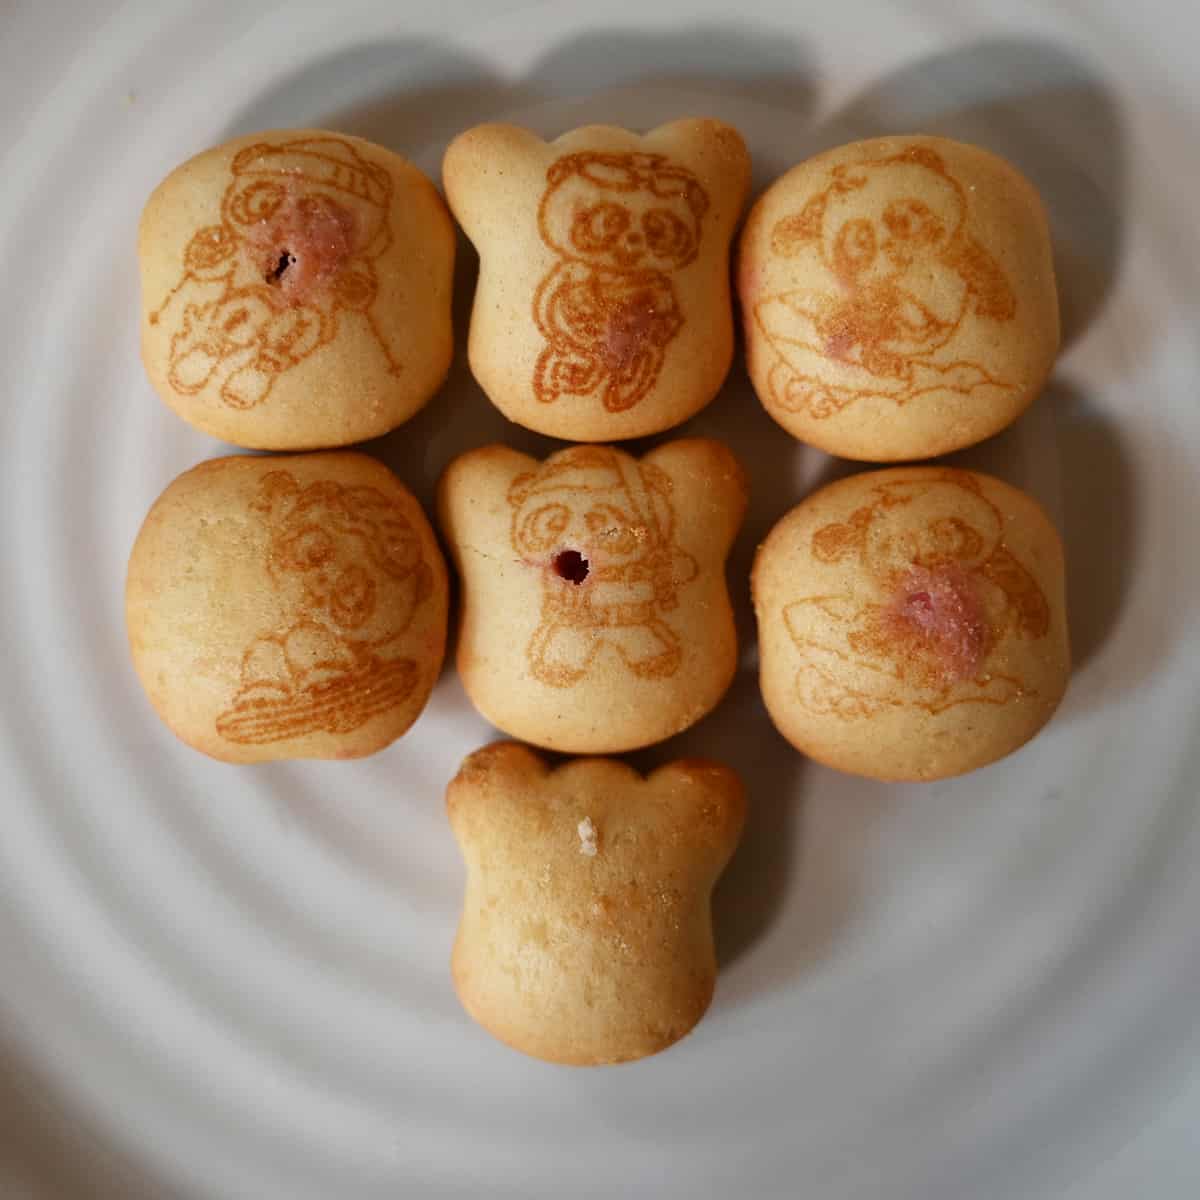 Top down image of seven Hello Panda Cookies served on a plate. Each cookie has an image of a panda doing a different activity on it.